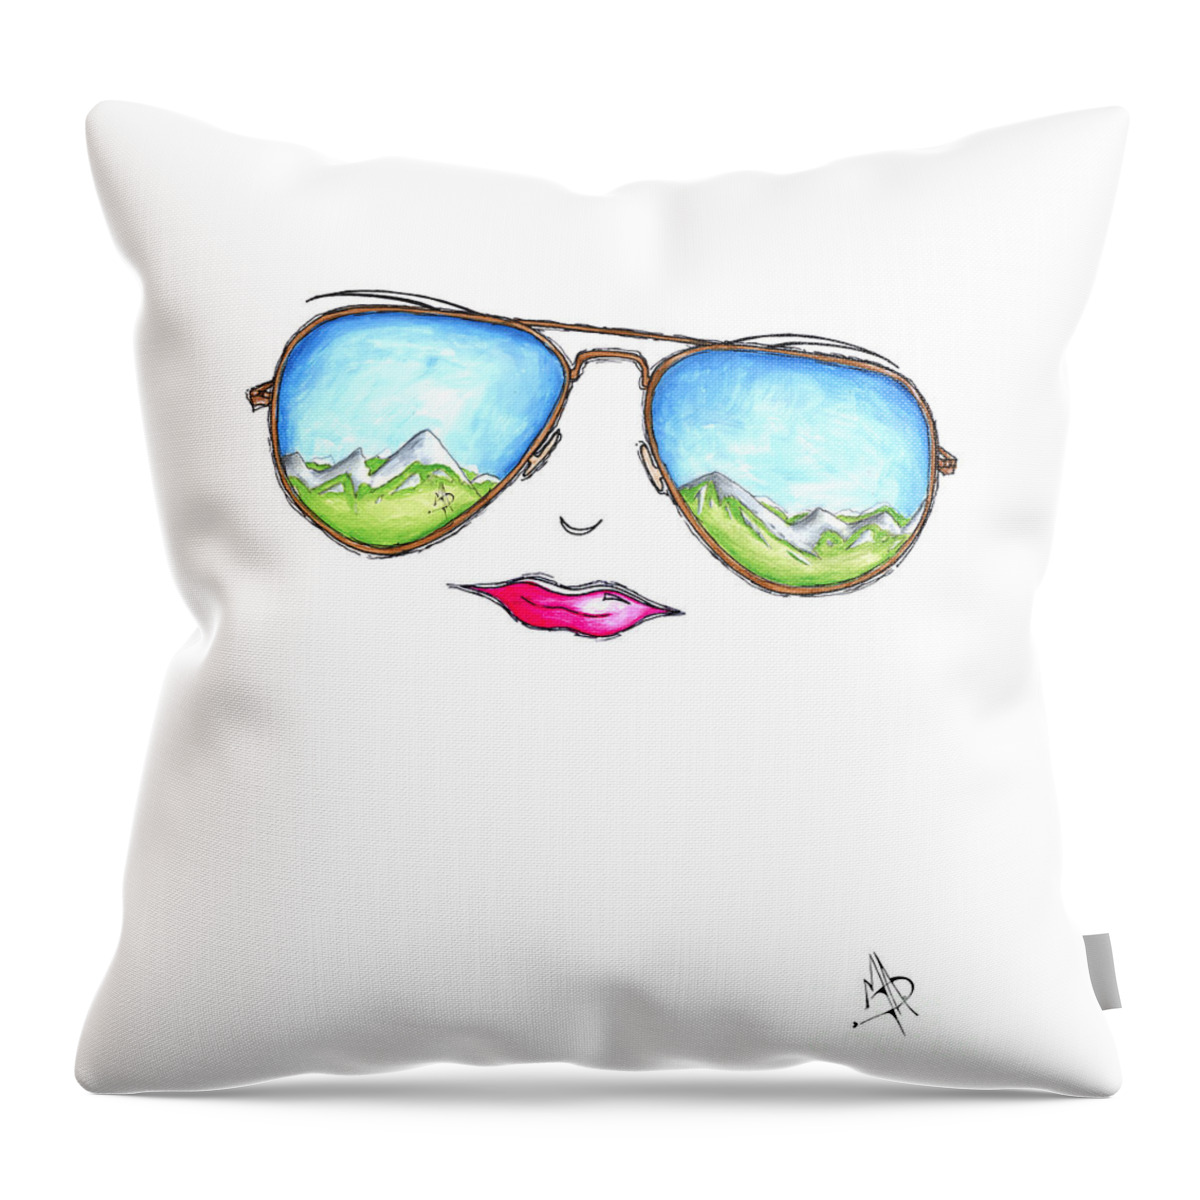 Aviator Throw Pillow featuring the painting Mountain View Aviator Sunglasses PoP Art Painting Pink Lips Aroon Melane 2015 Collection by Megan Aroon